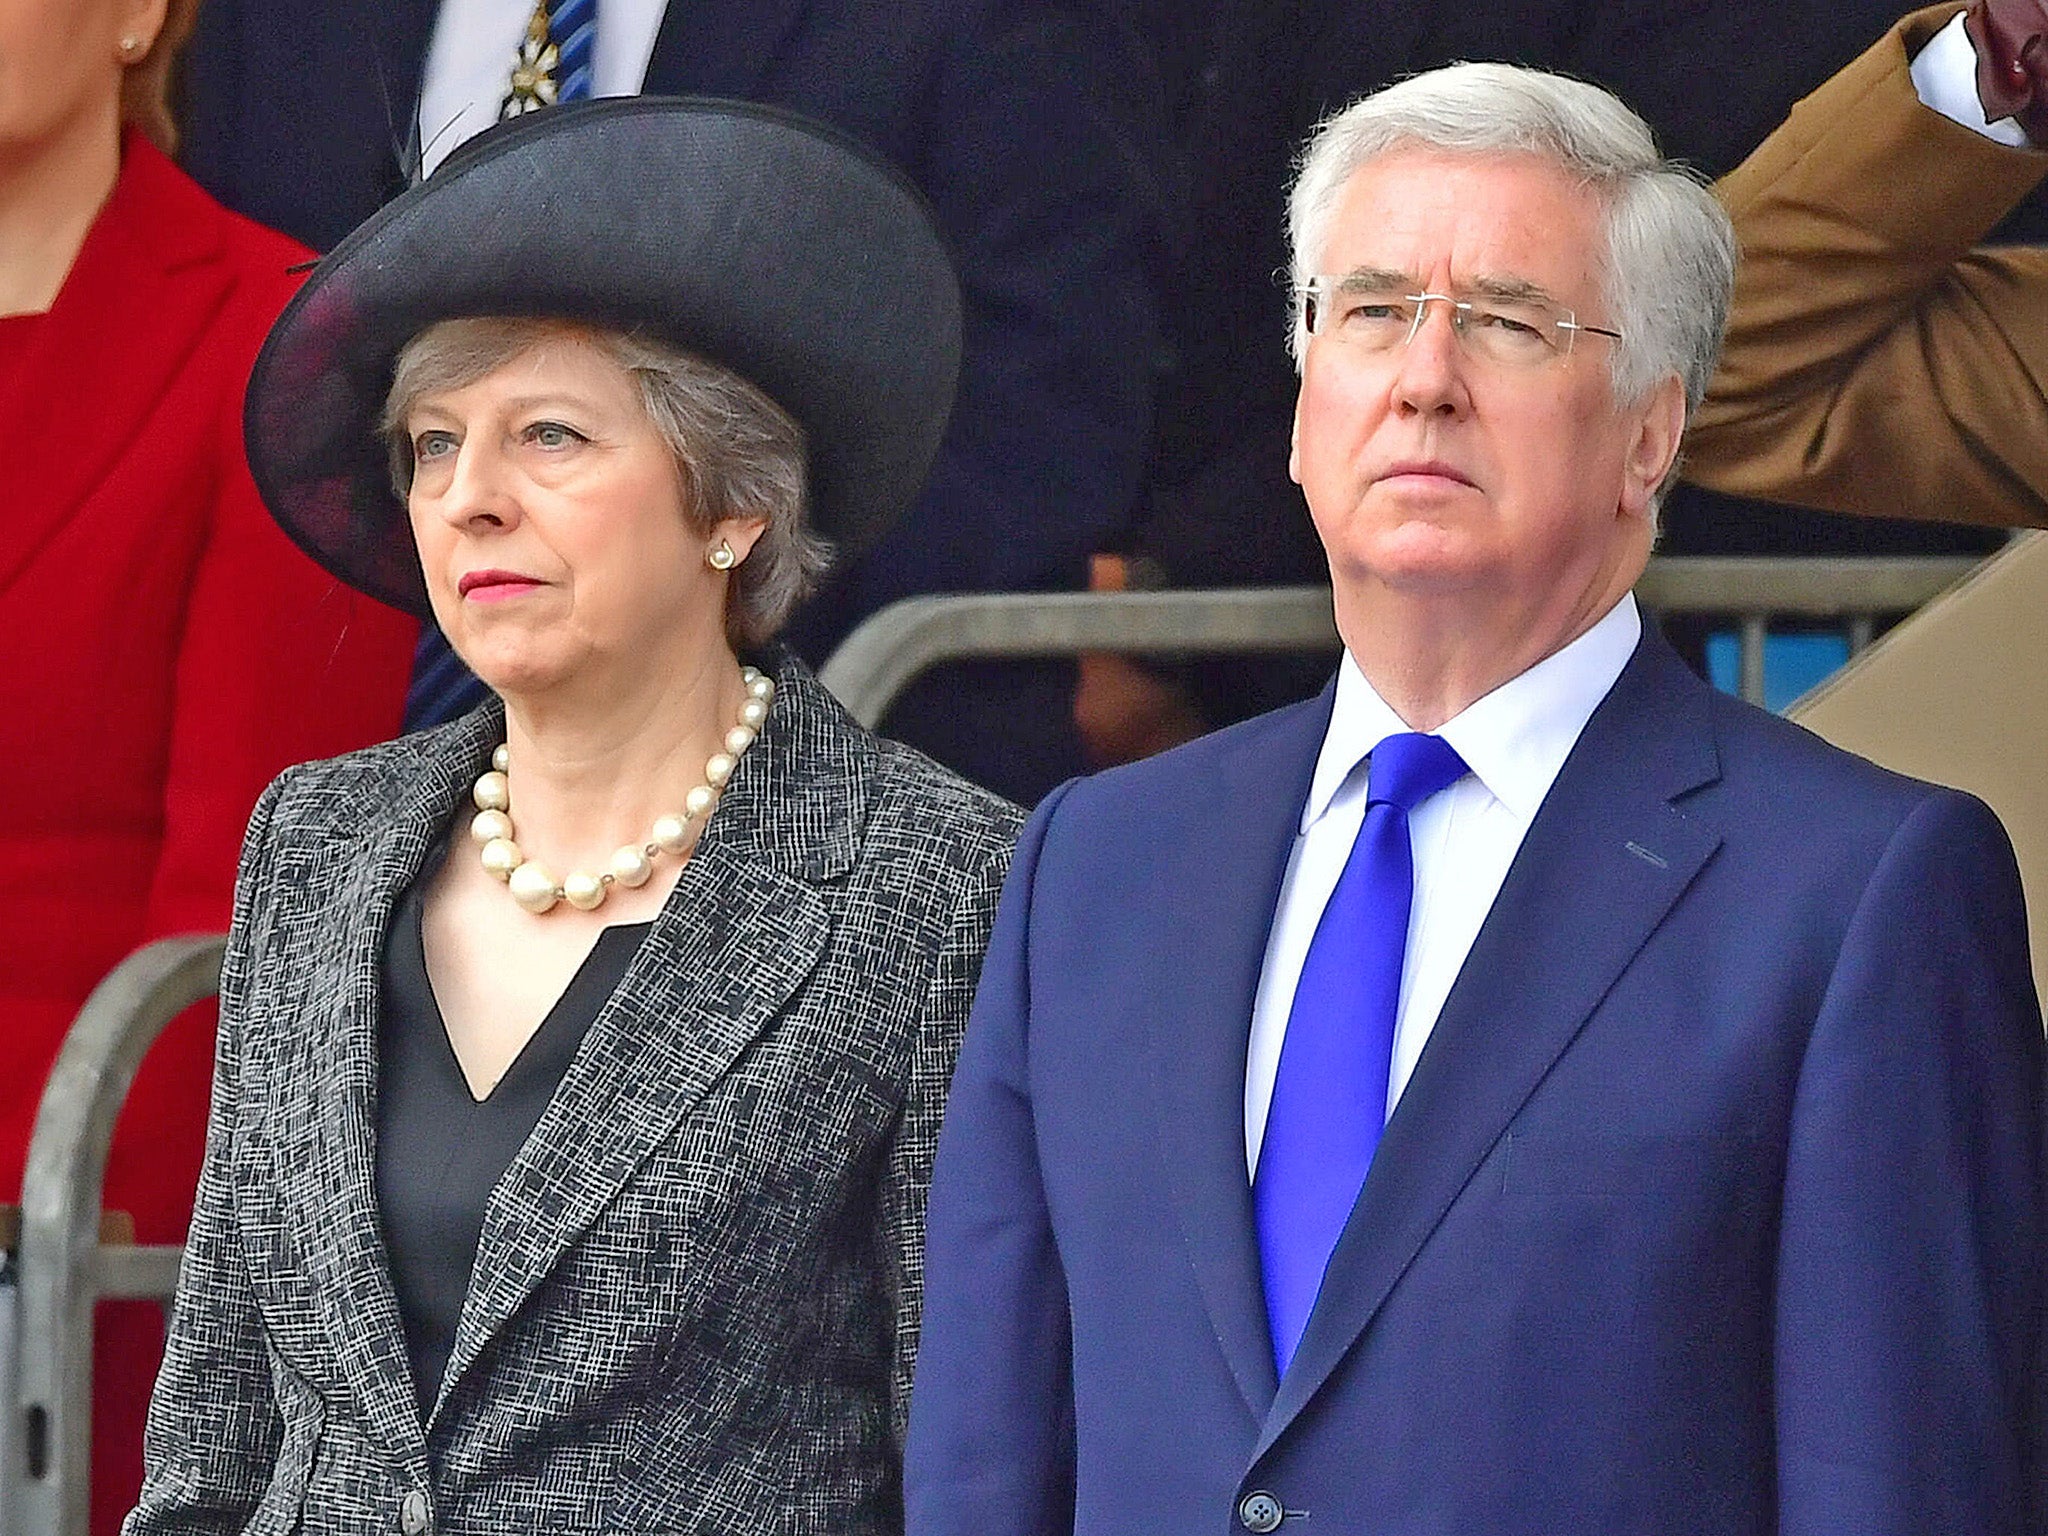 Michael Fallon resigned from his post as Defence Secretary